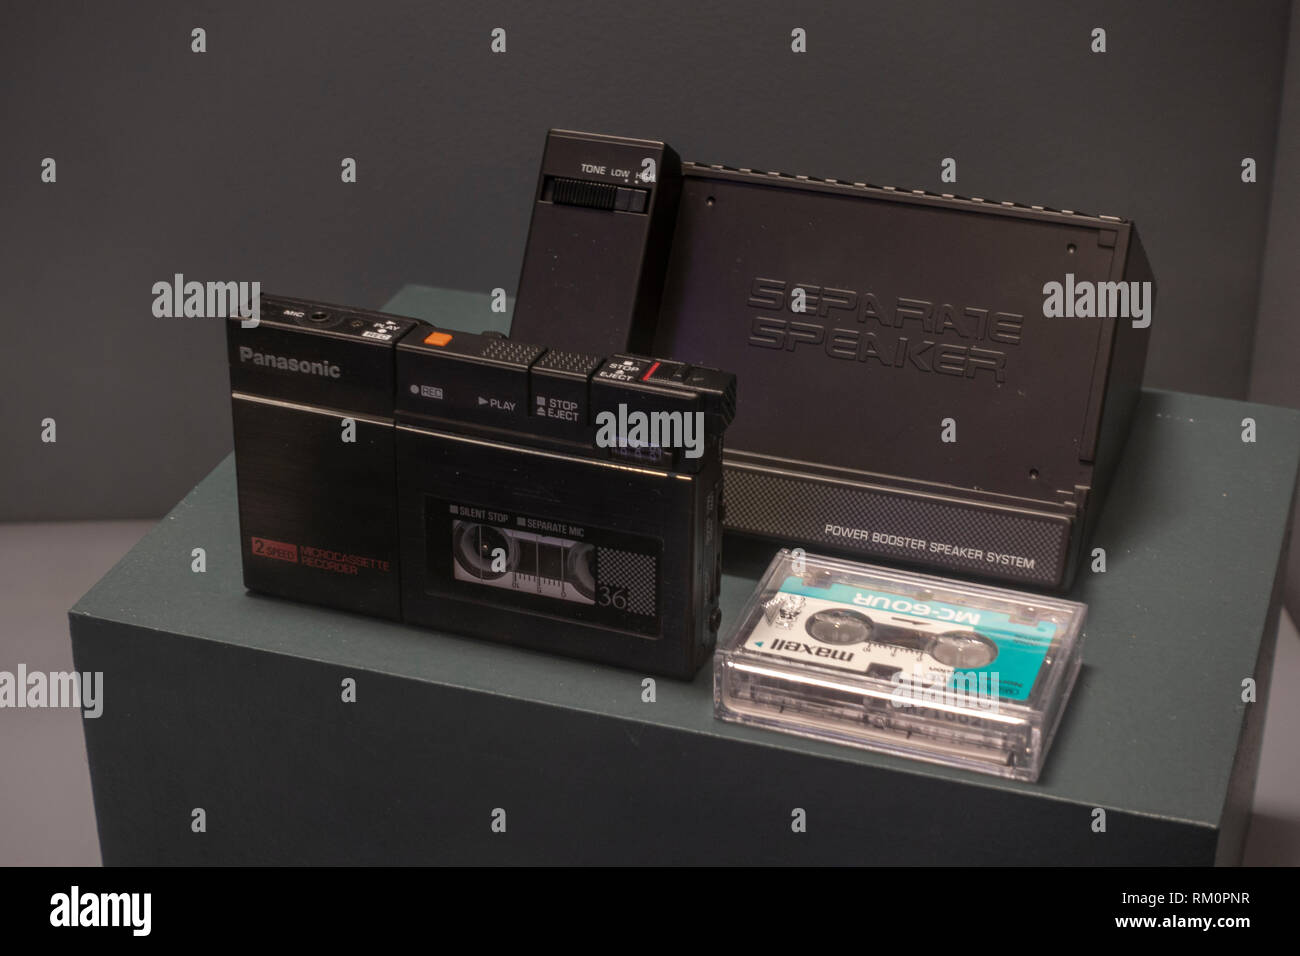 A Panasonic 2 speed microcassette recorder (RN-36), power booster speaker system, The Mob Museum, Las Vegas, Nevada, United States. Stock Photo